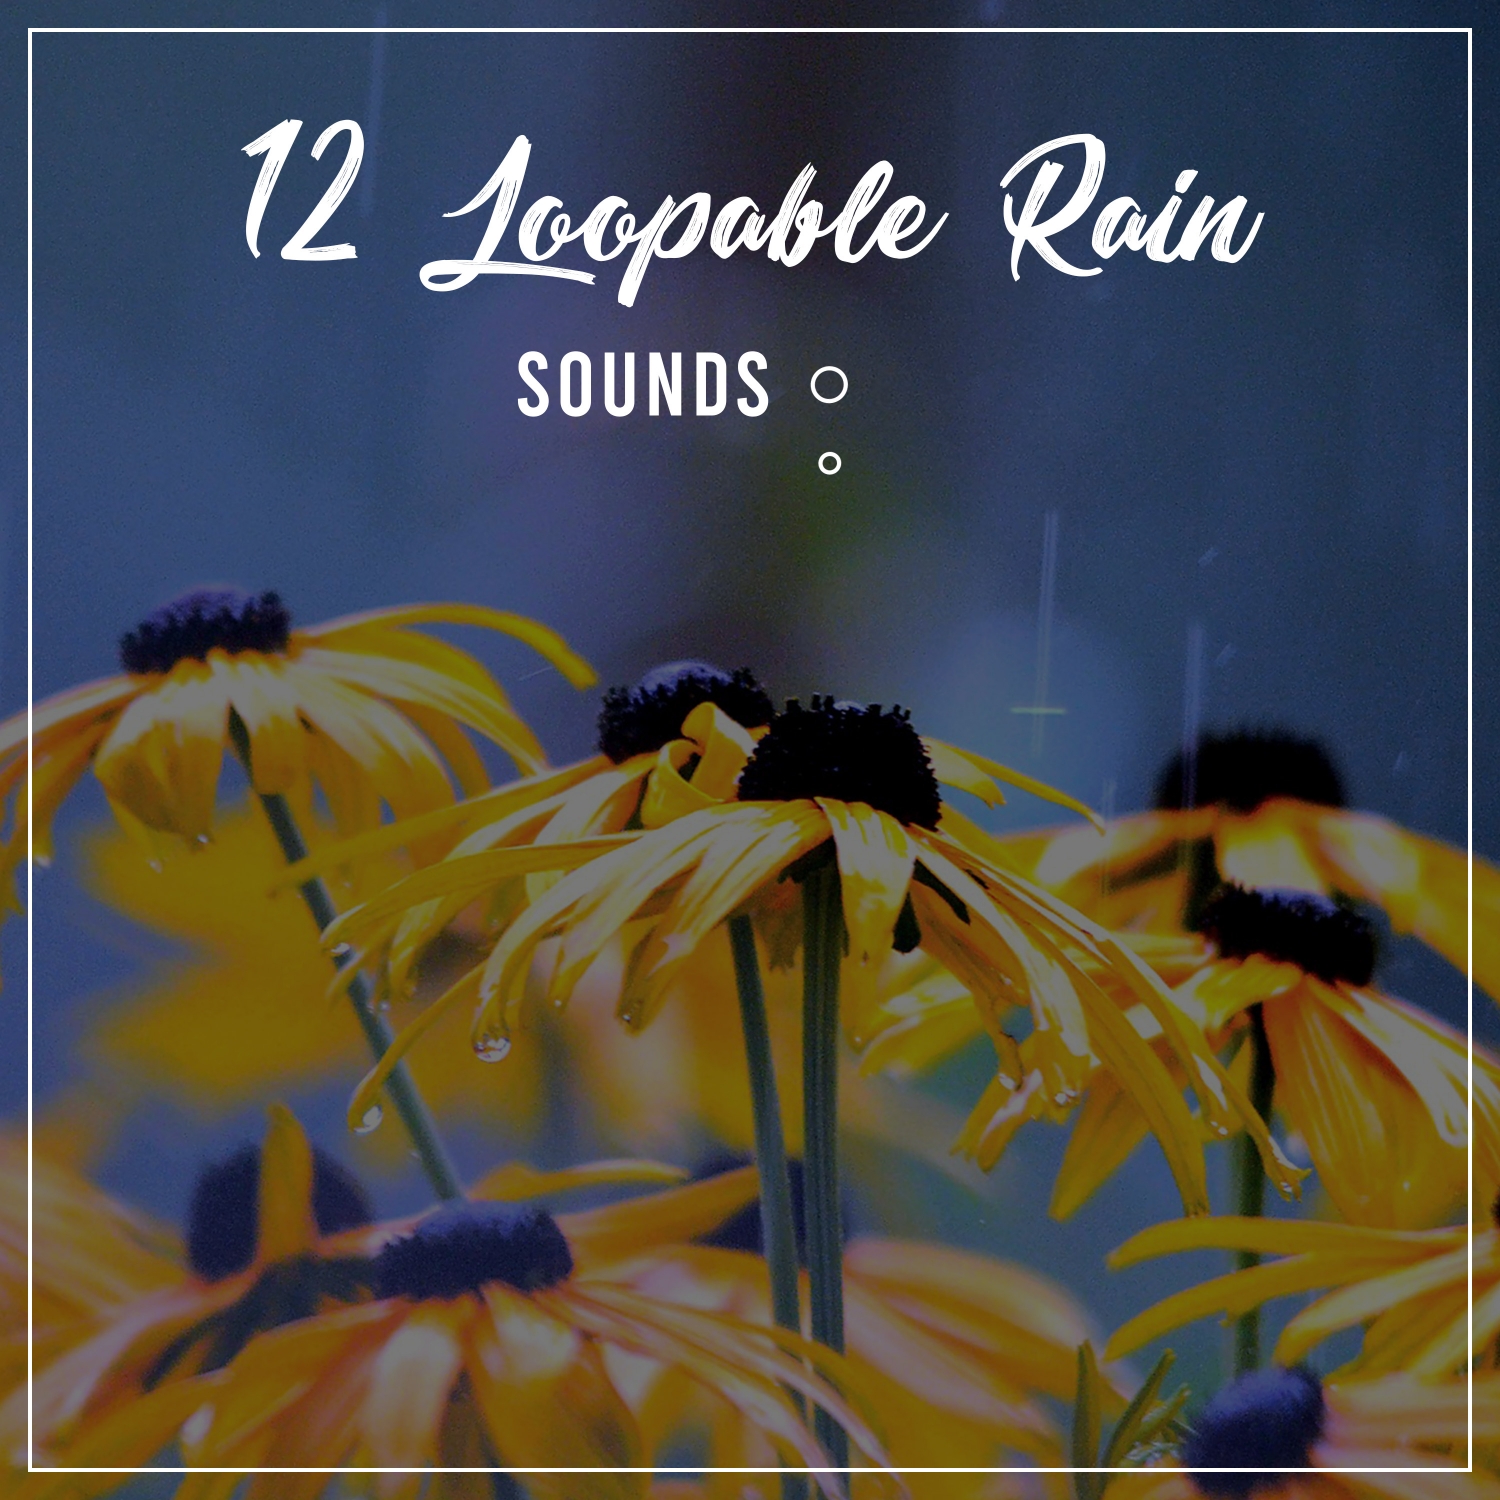 12 Loopable Rain and Nature Sounds